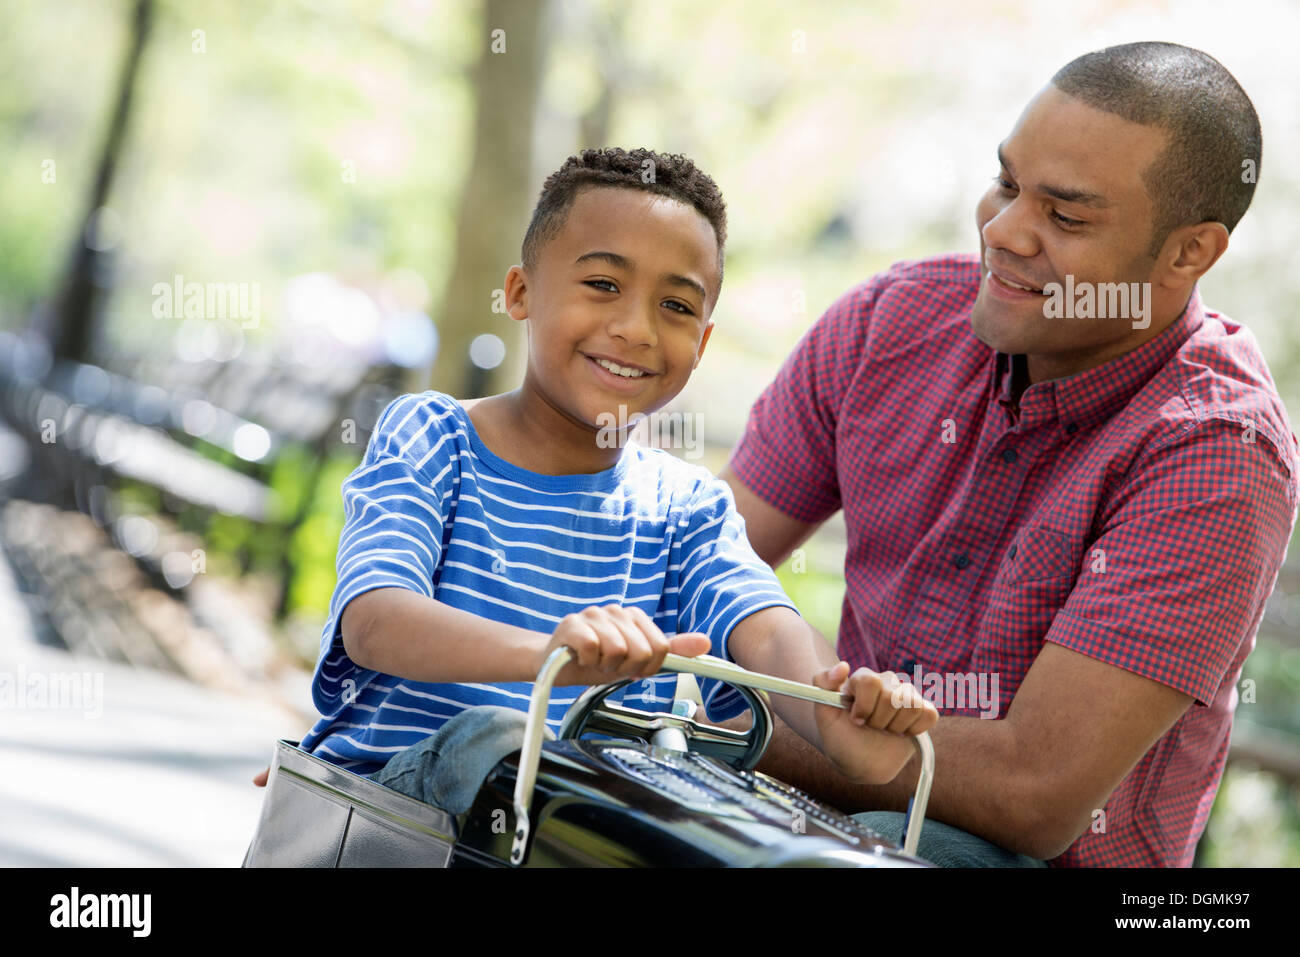 A boy riding an old fashioned toy peddle car. Stock Photo